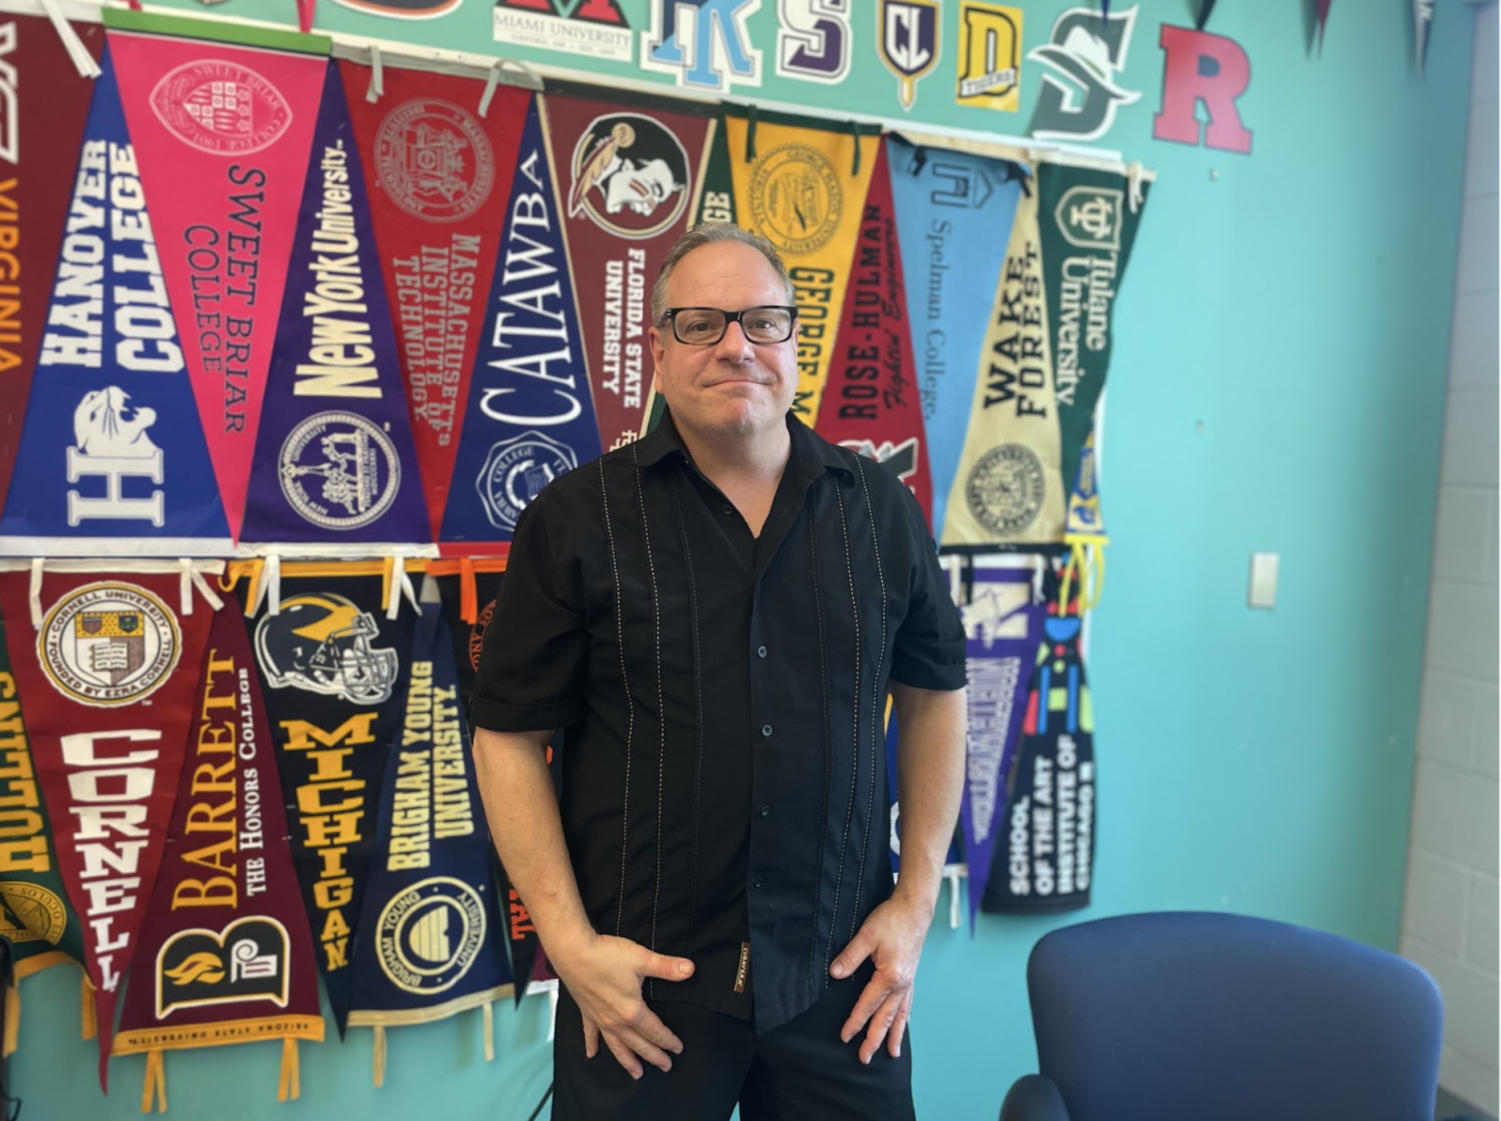 MD Calabro, College and Career Counselor